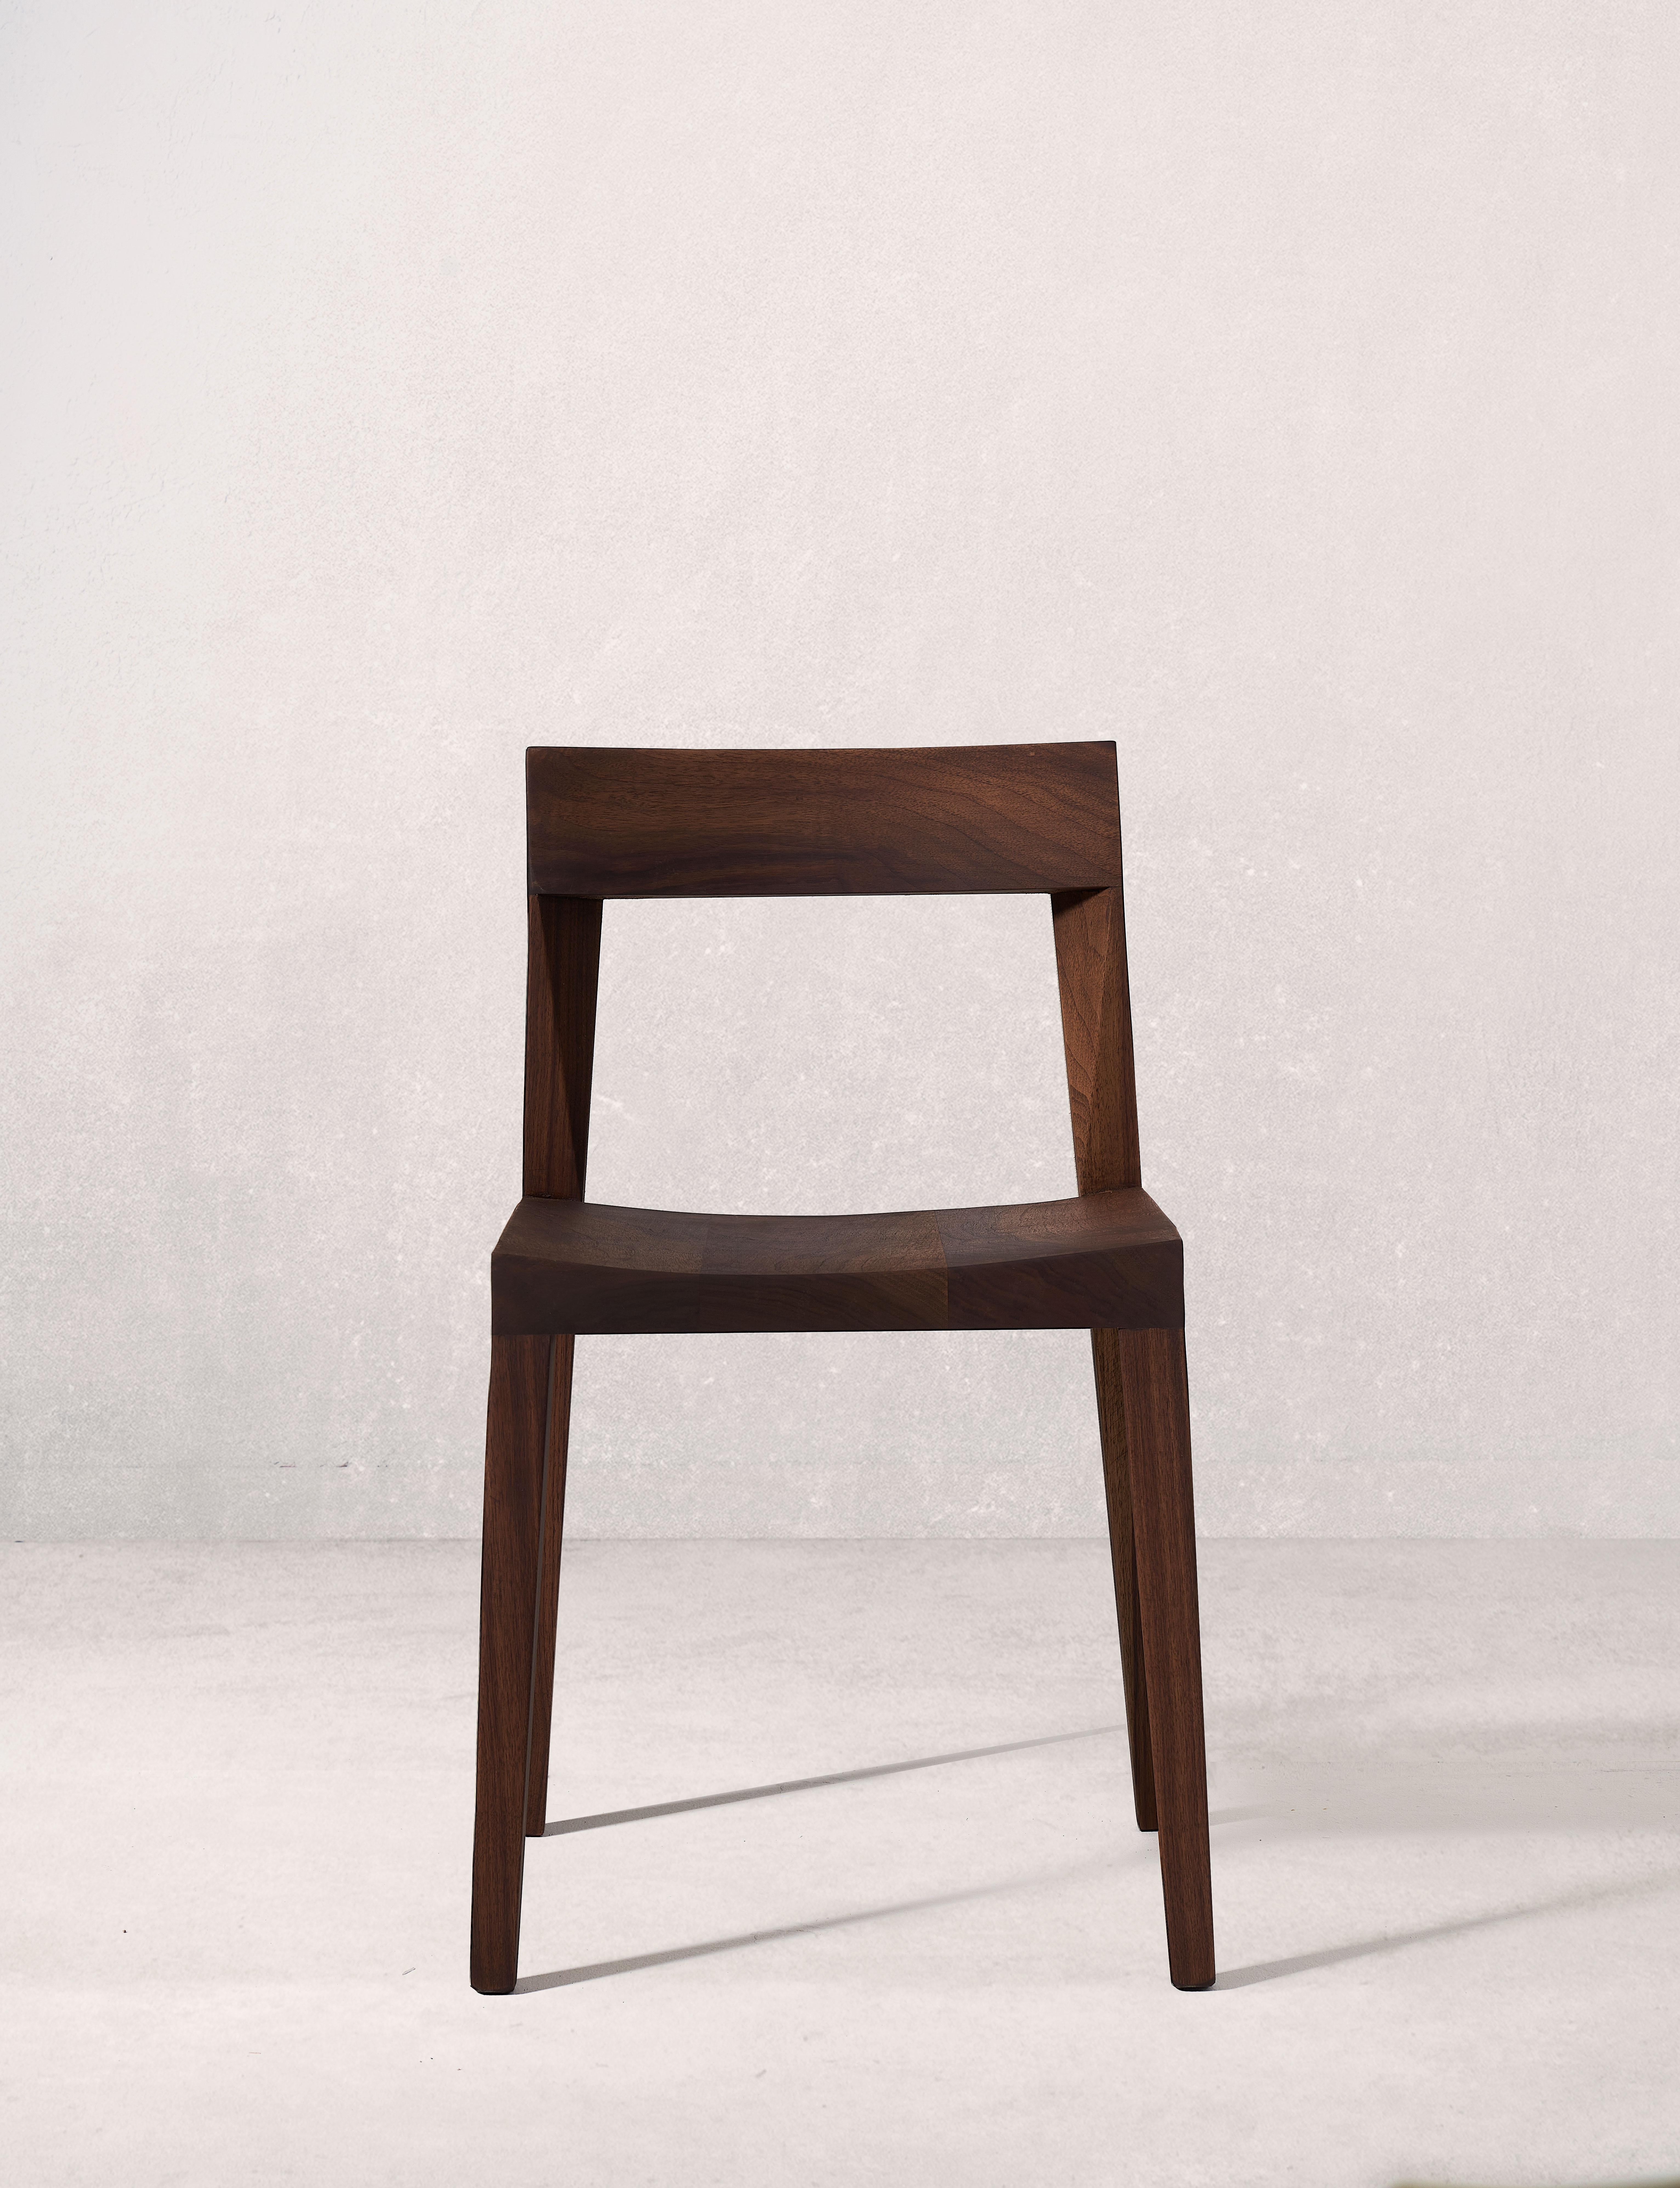 Sirwa Chair by Selma Lazrak
Dimensions: D 50 x W 46 x H 77 cm 
Materials: Solid American walnut.

The chair mirrors the contours of the Sirwa region in Morocco, known for its dramatic peaks and valleys.
The smooth and unbroken lines are refined to